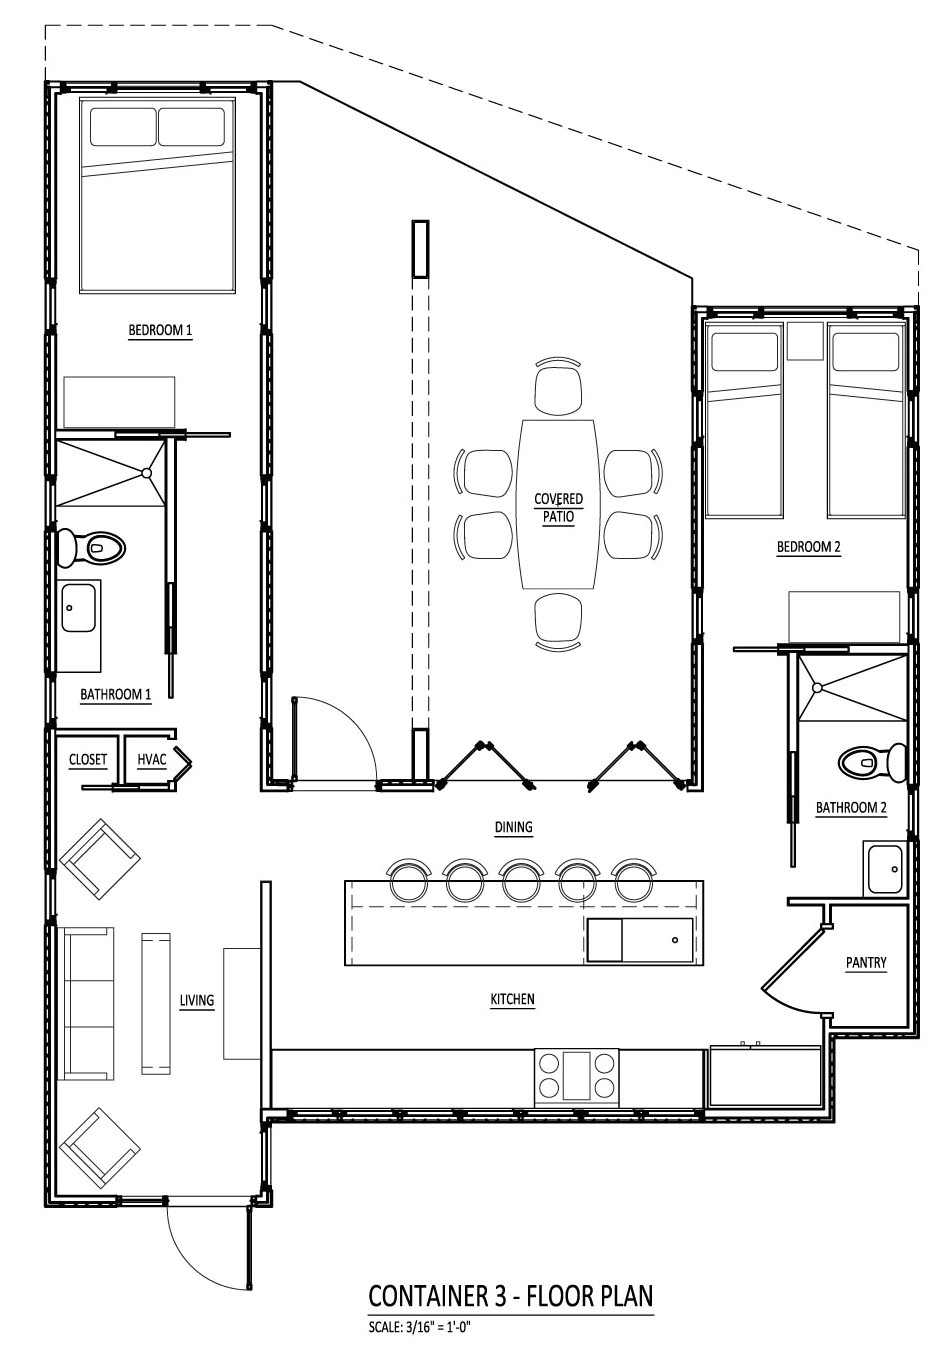 Floor Plans for Storage Container Homes Sense and Simplicity Shipping Container Homes 6